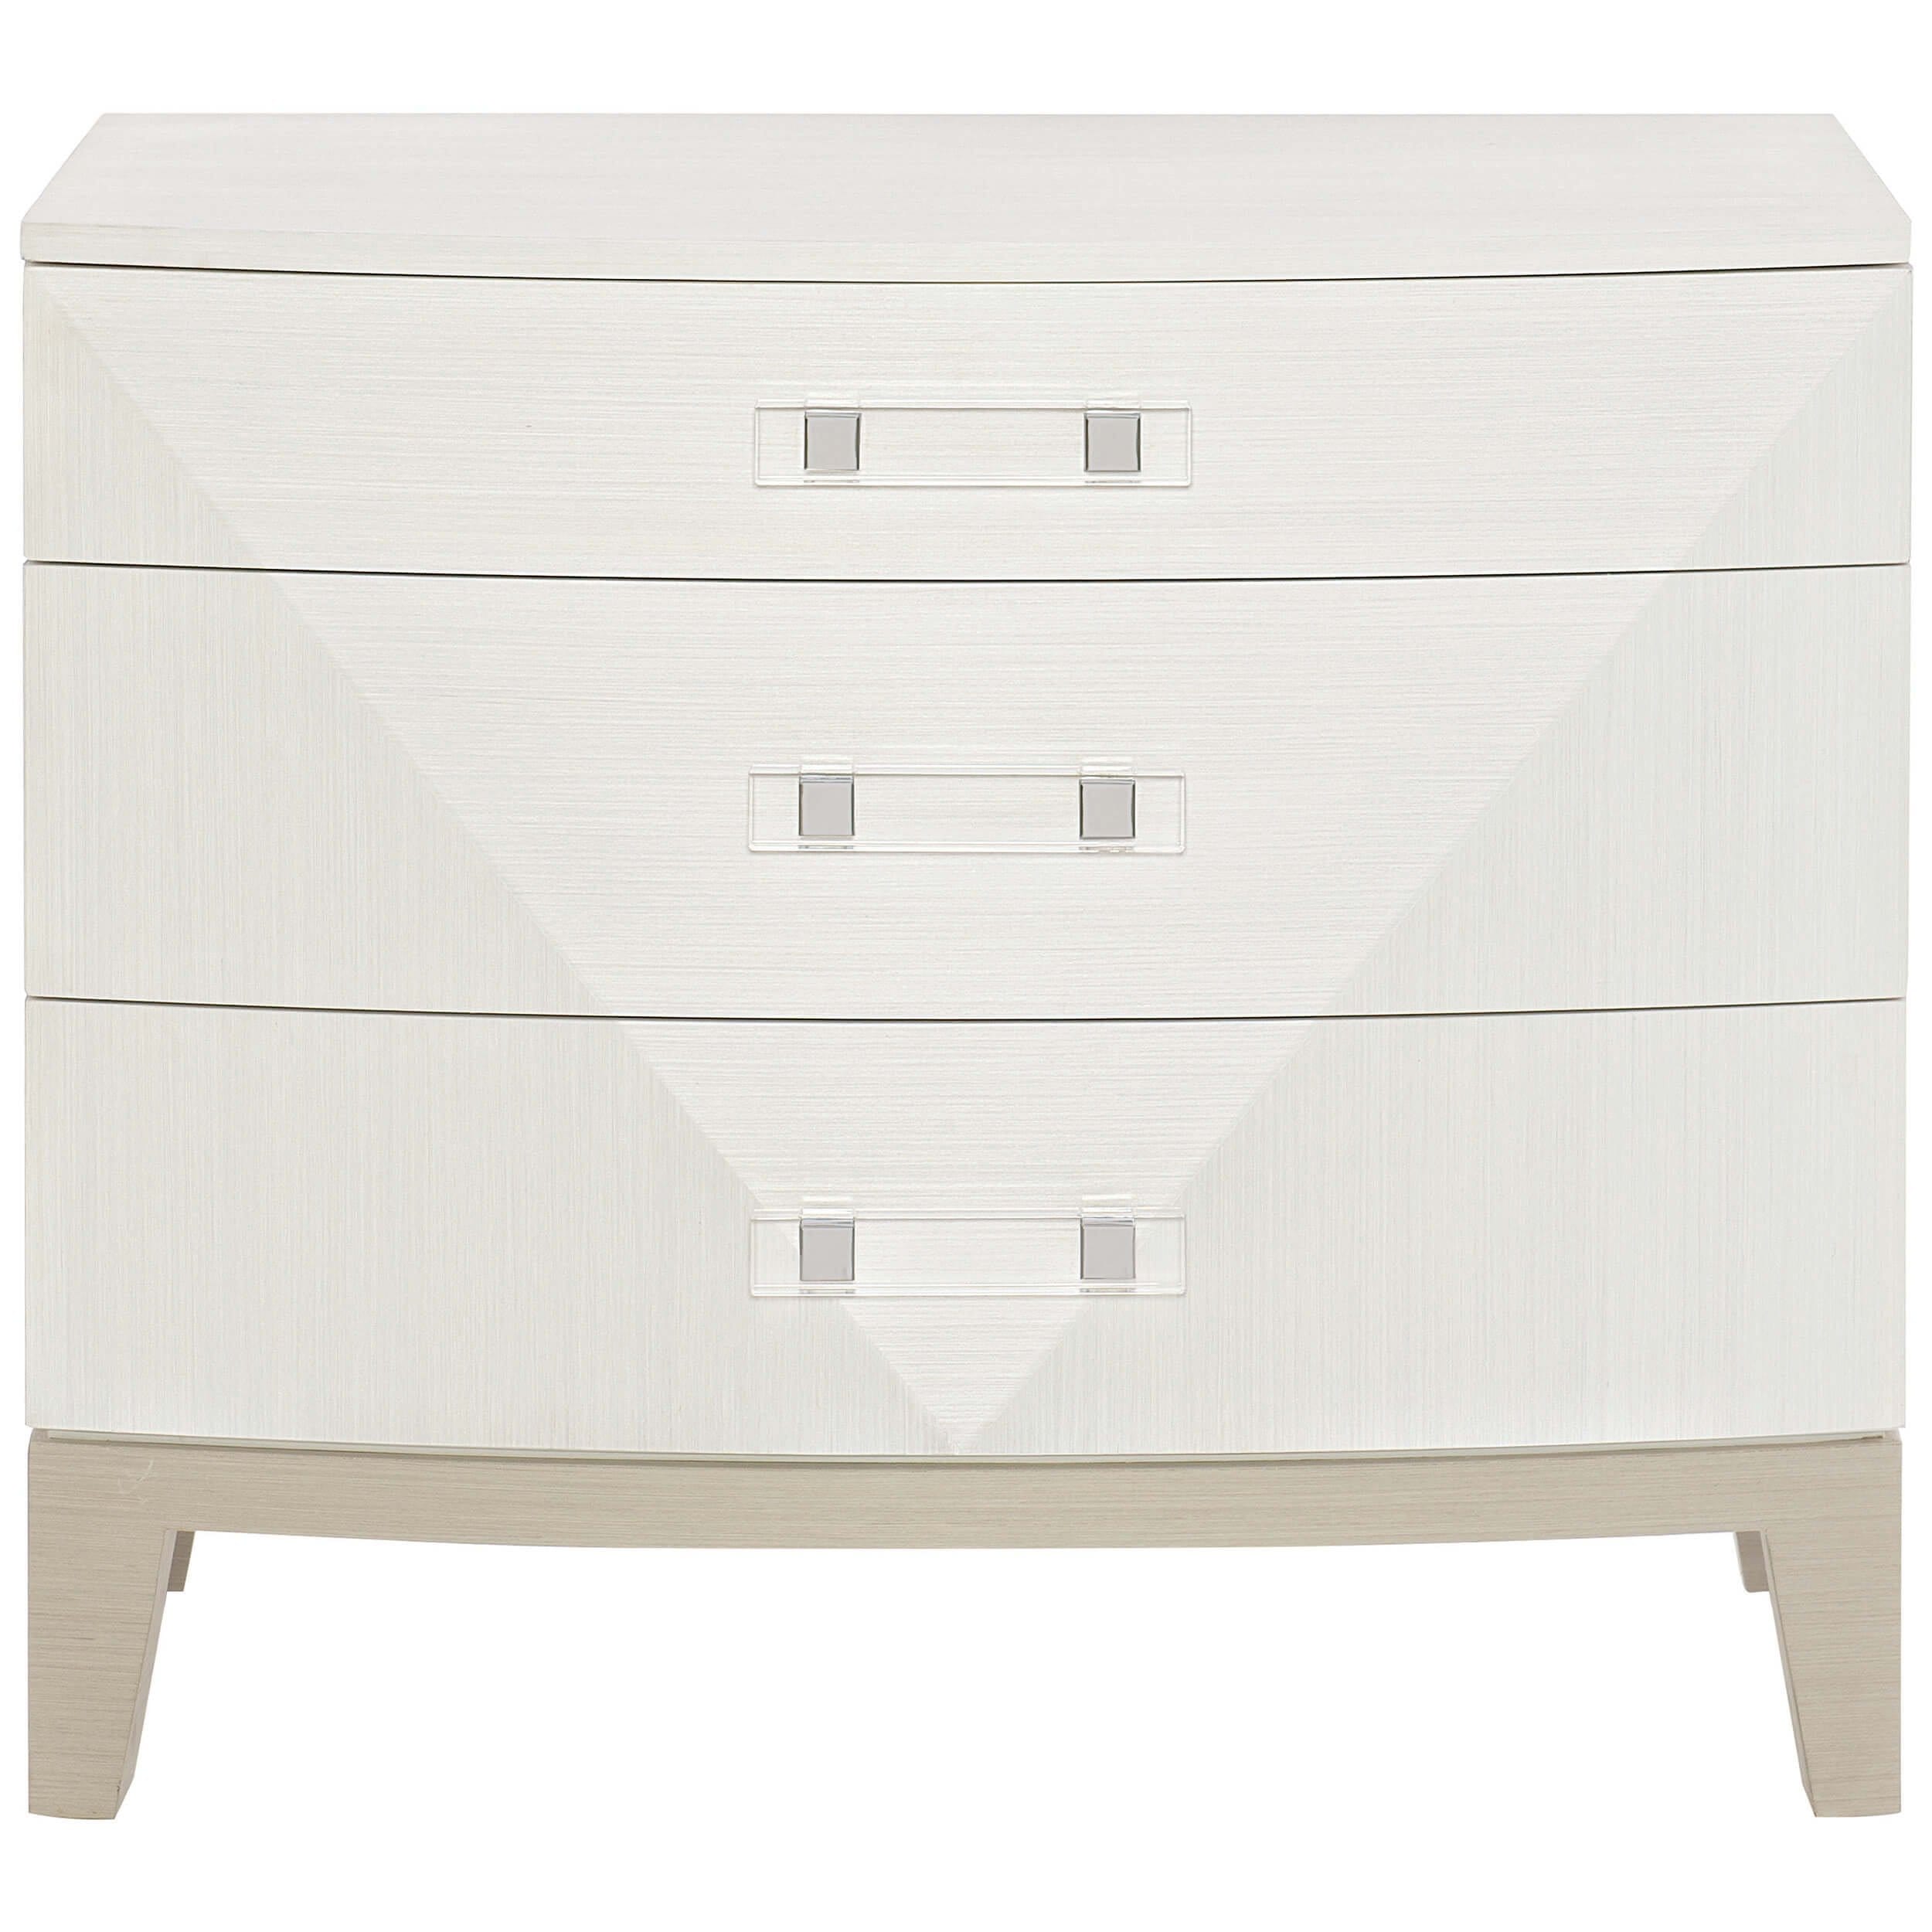 Image of Axiom Wide Nightstand